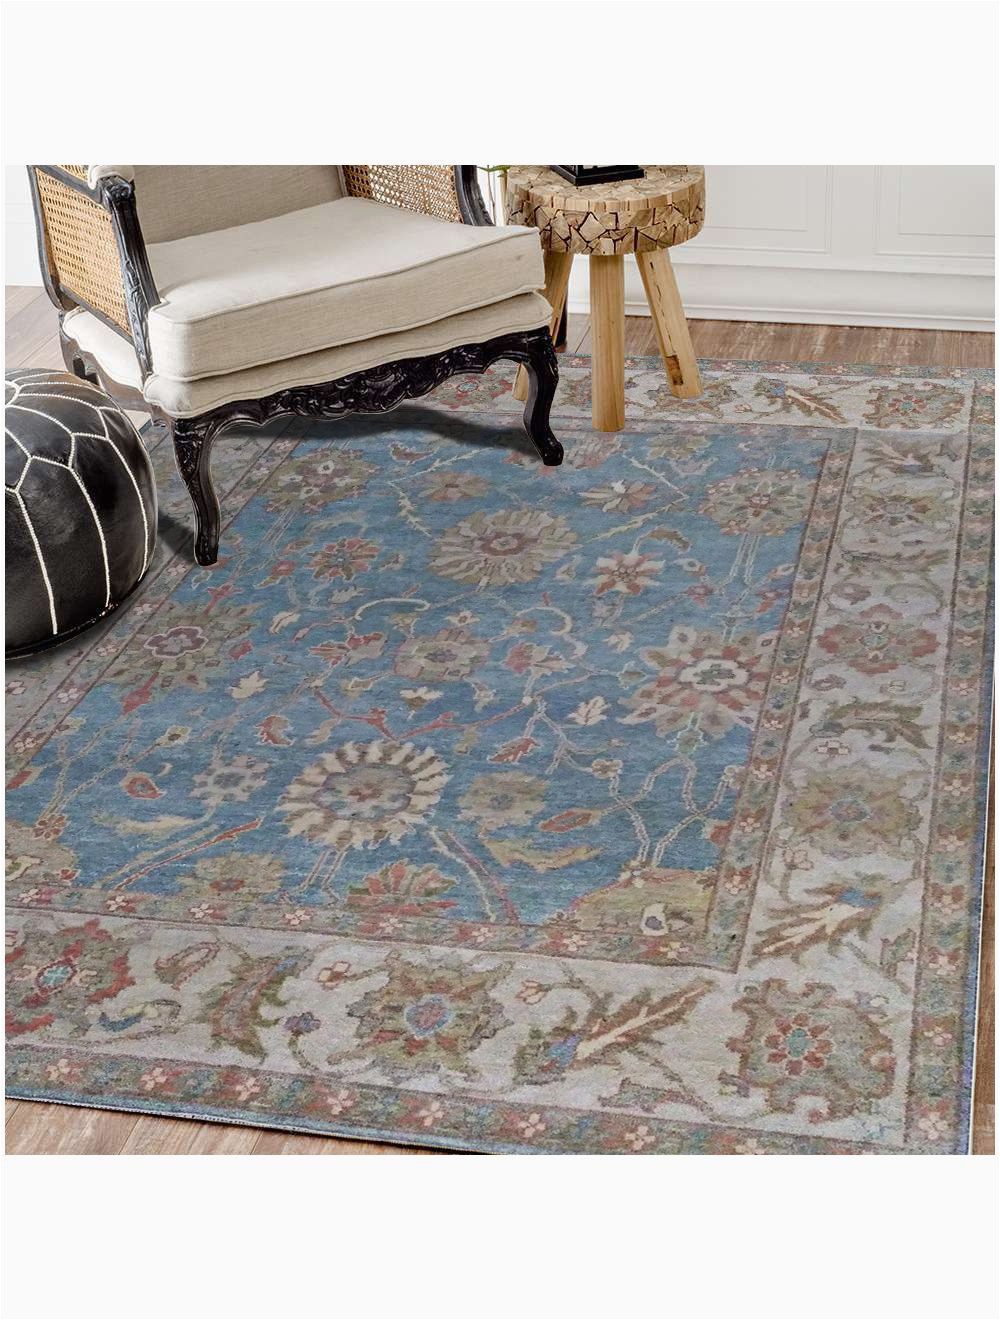 amadeo persian traditional floral blue hand knotted wool rug 10 x 10